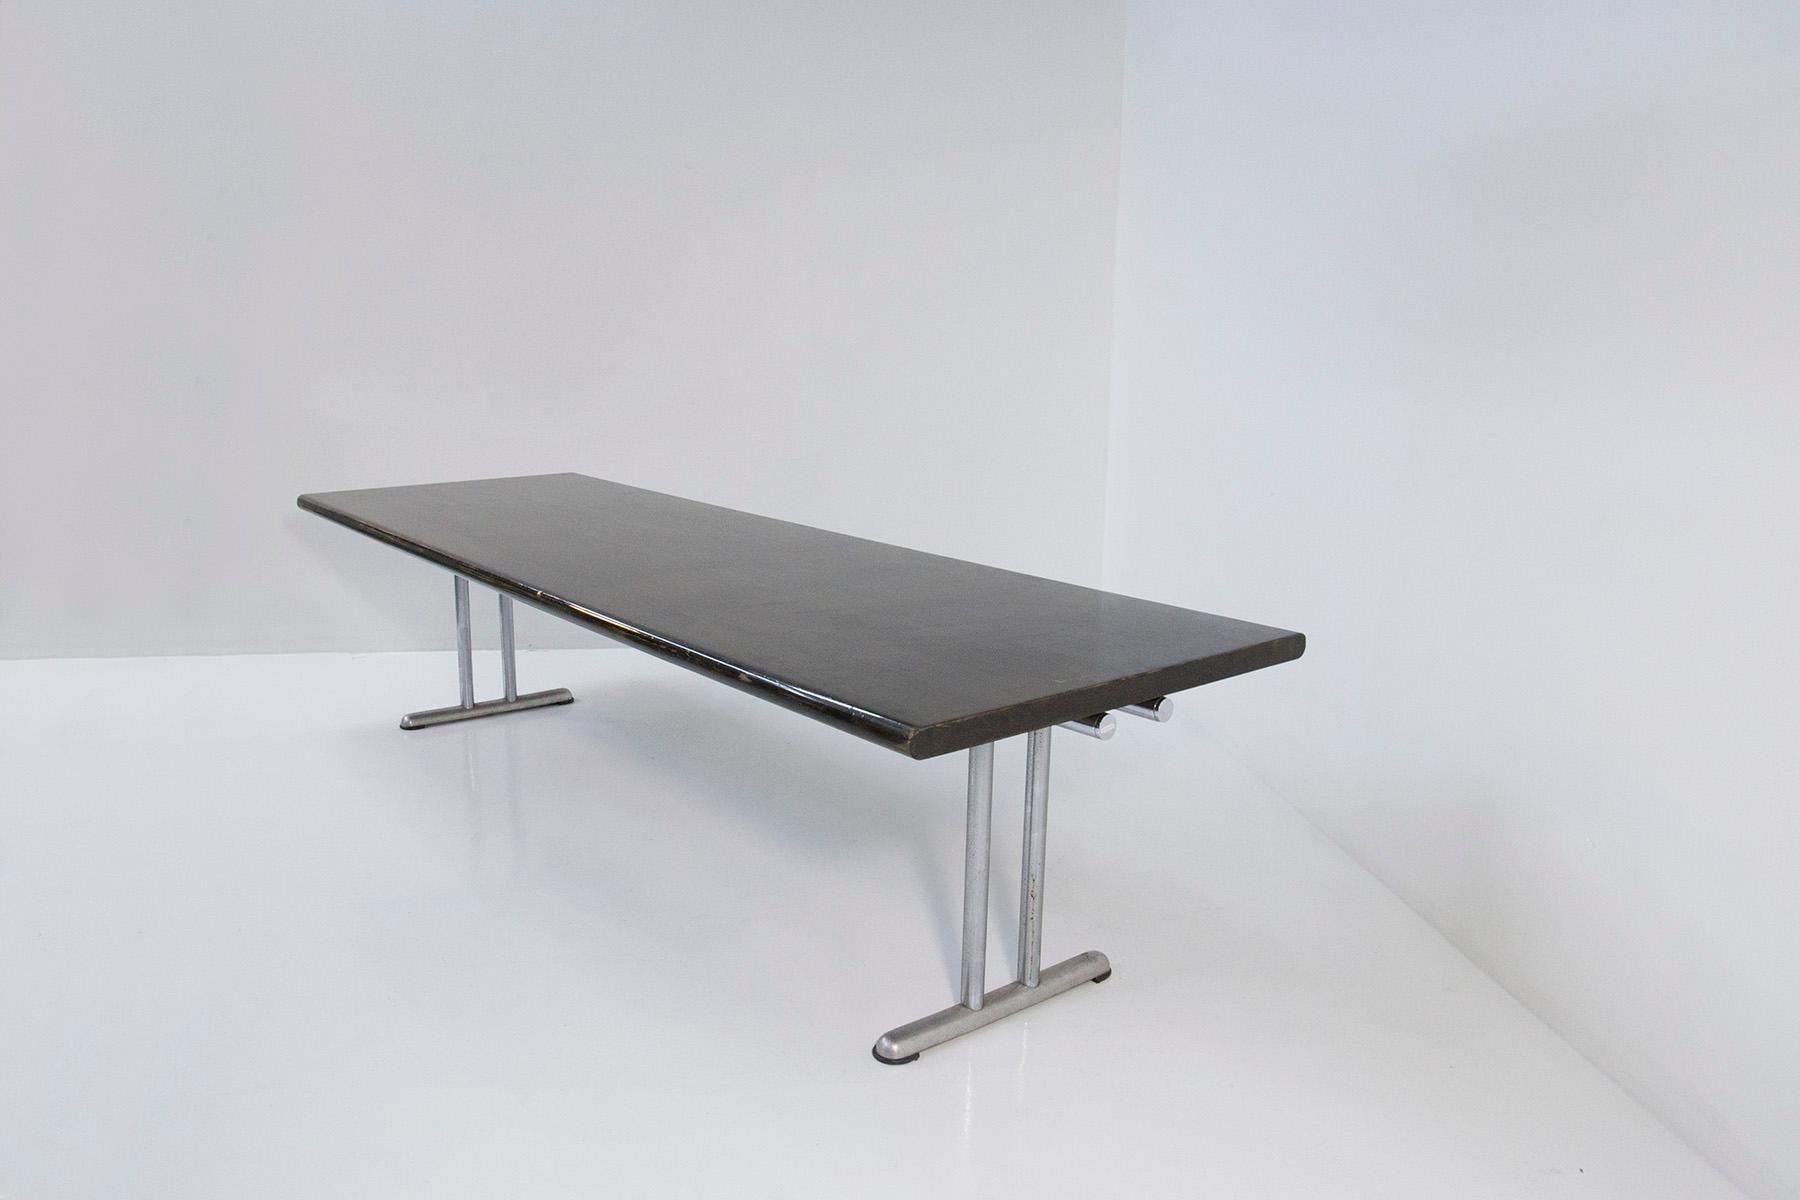 Large dining table designed by Hans von Klier and Ettore Sottsass for Rossi di Albizzate in the 1960s. 1960s early 1970s. The table is part of the Sit System Series. The table is made with a tubular steel frame. Its tabletop, on the other hand, is